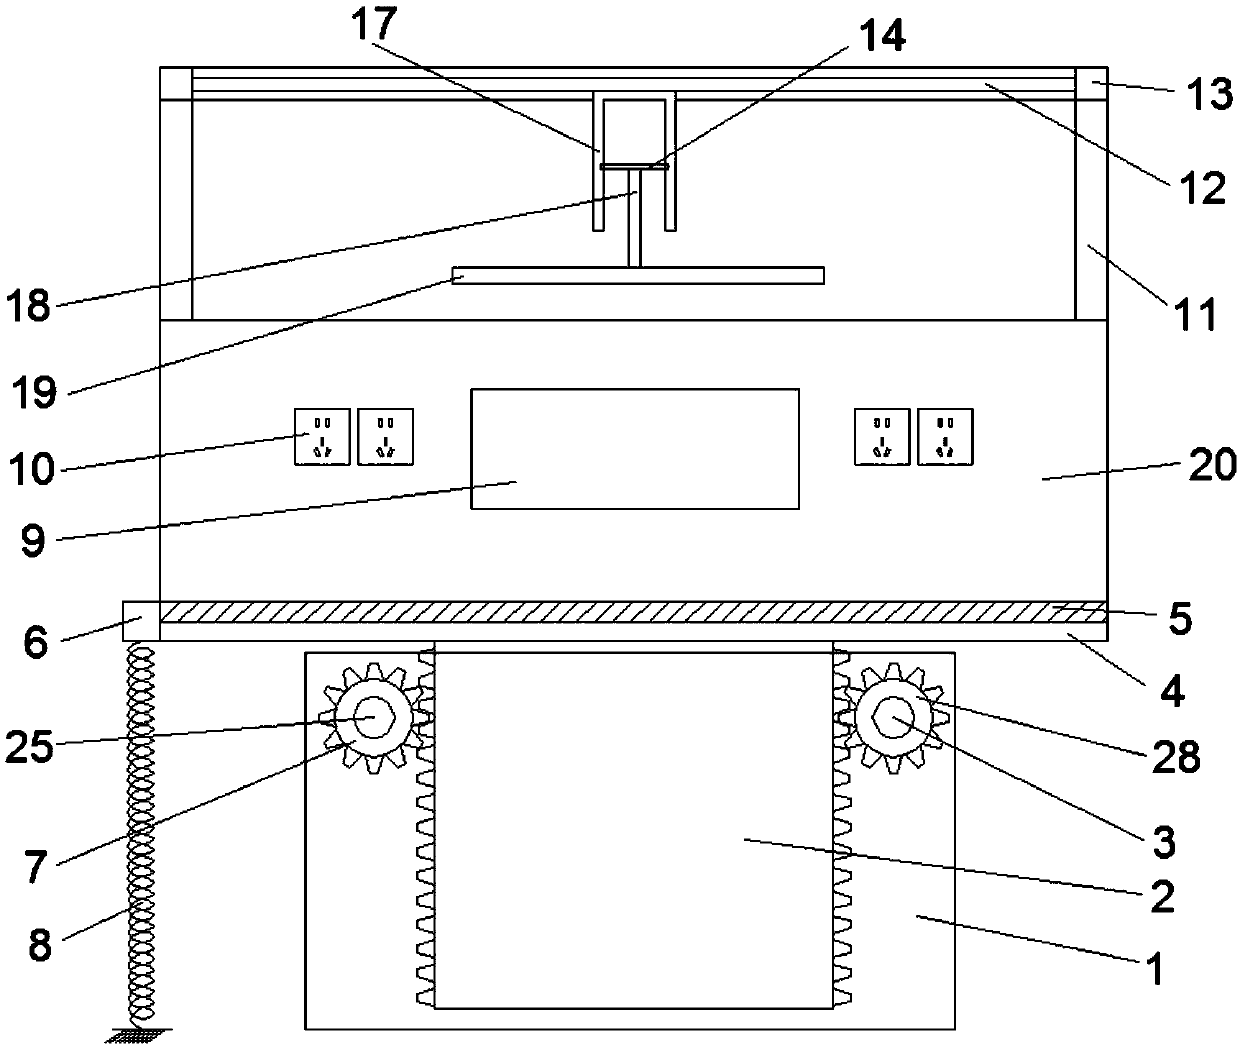 Anti-static working table applied to assembly of electronic products